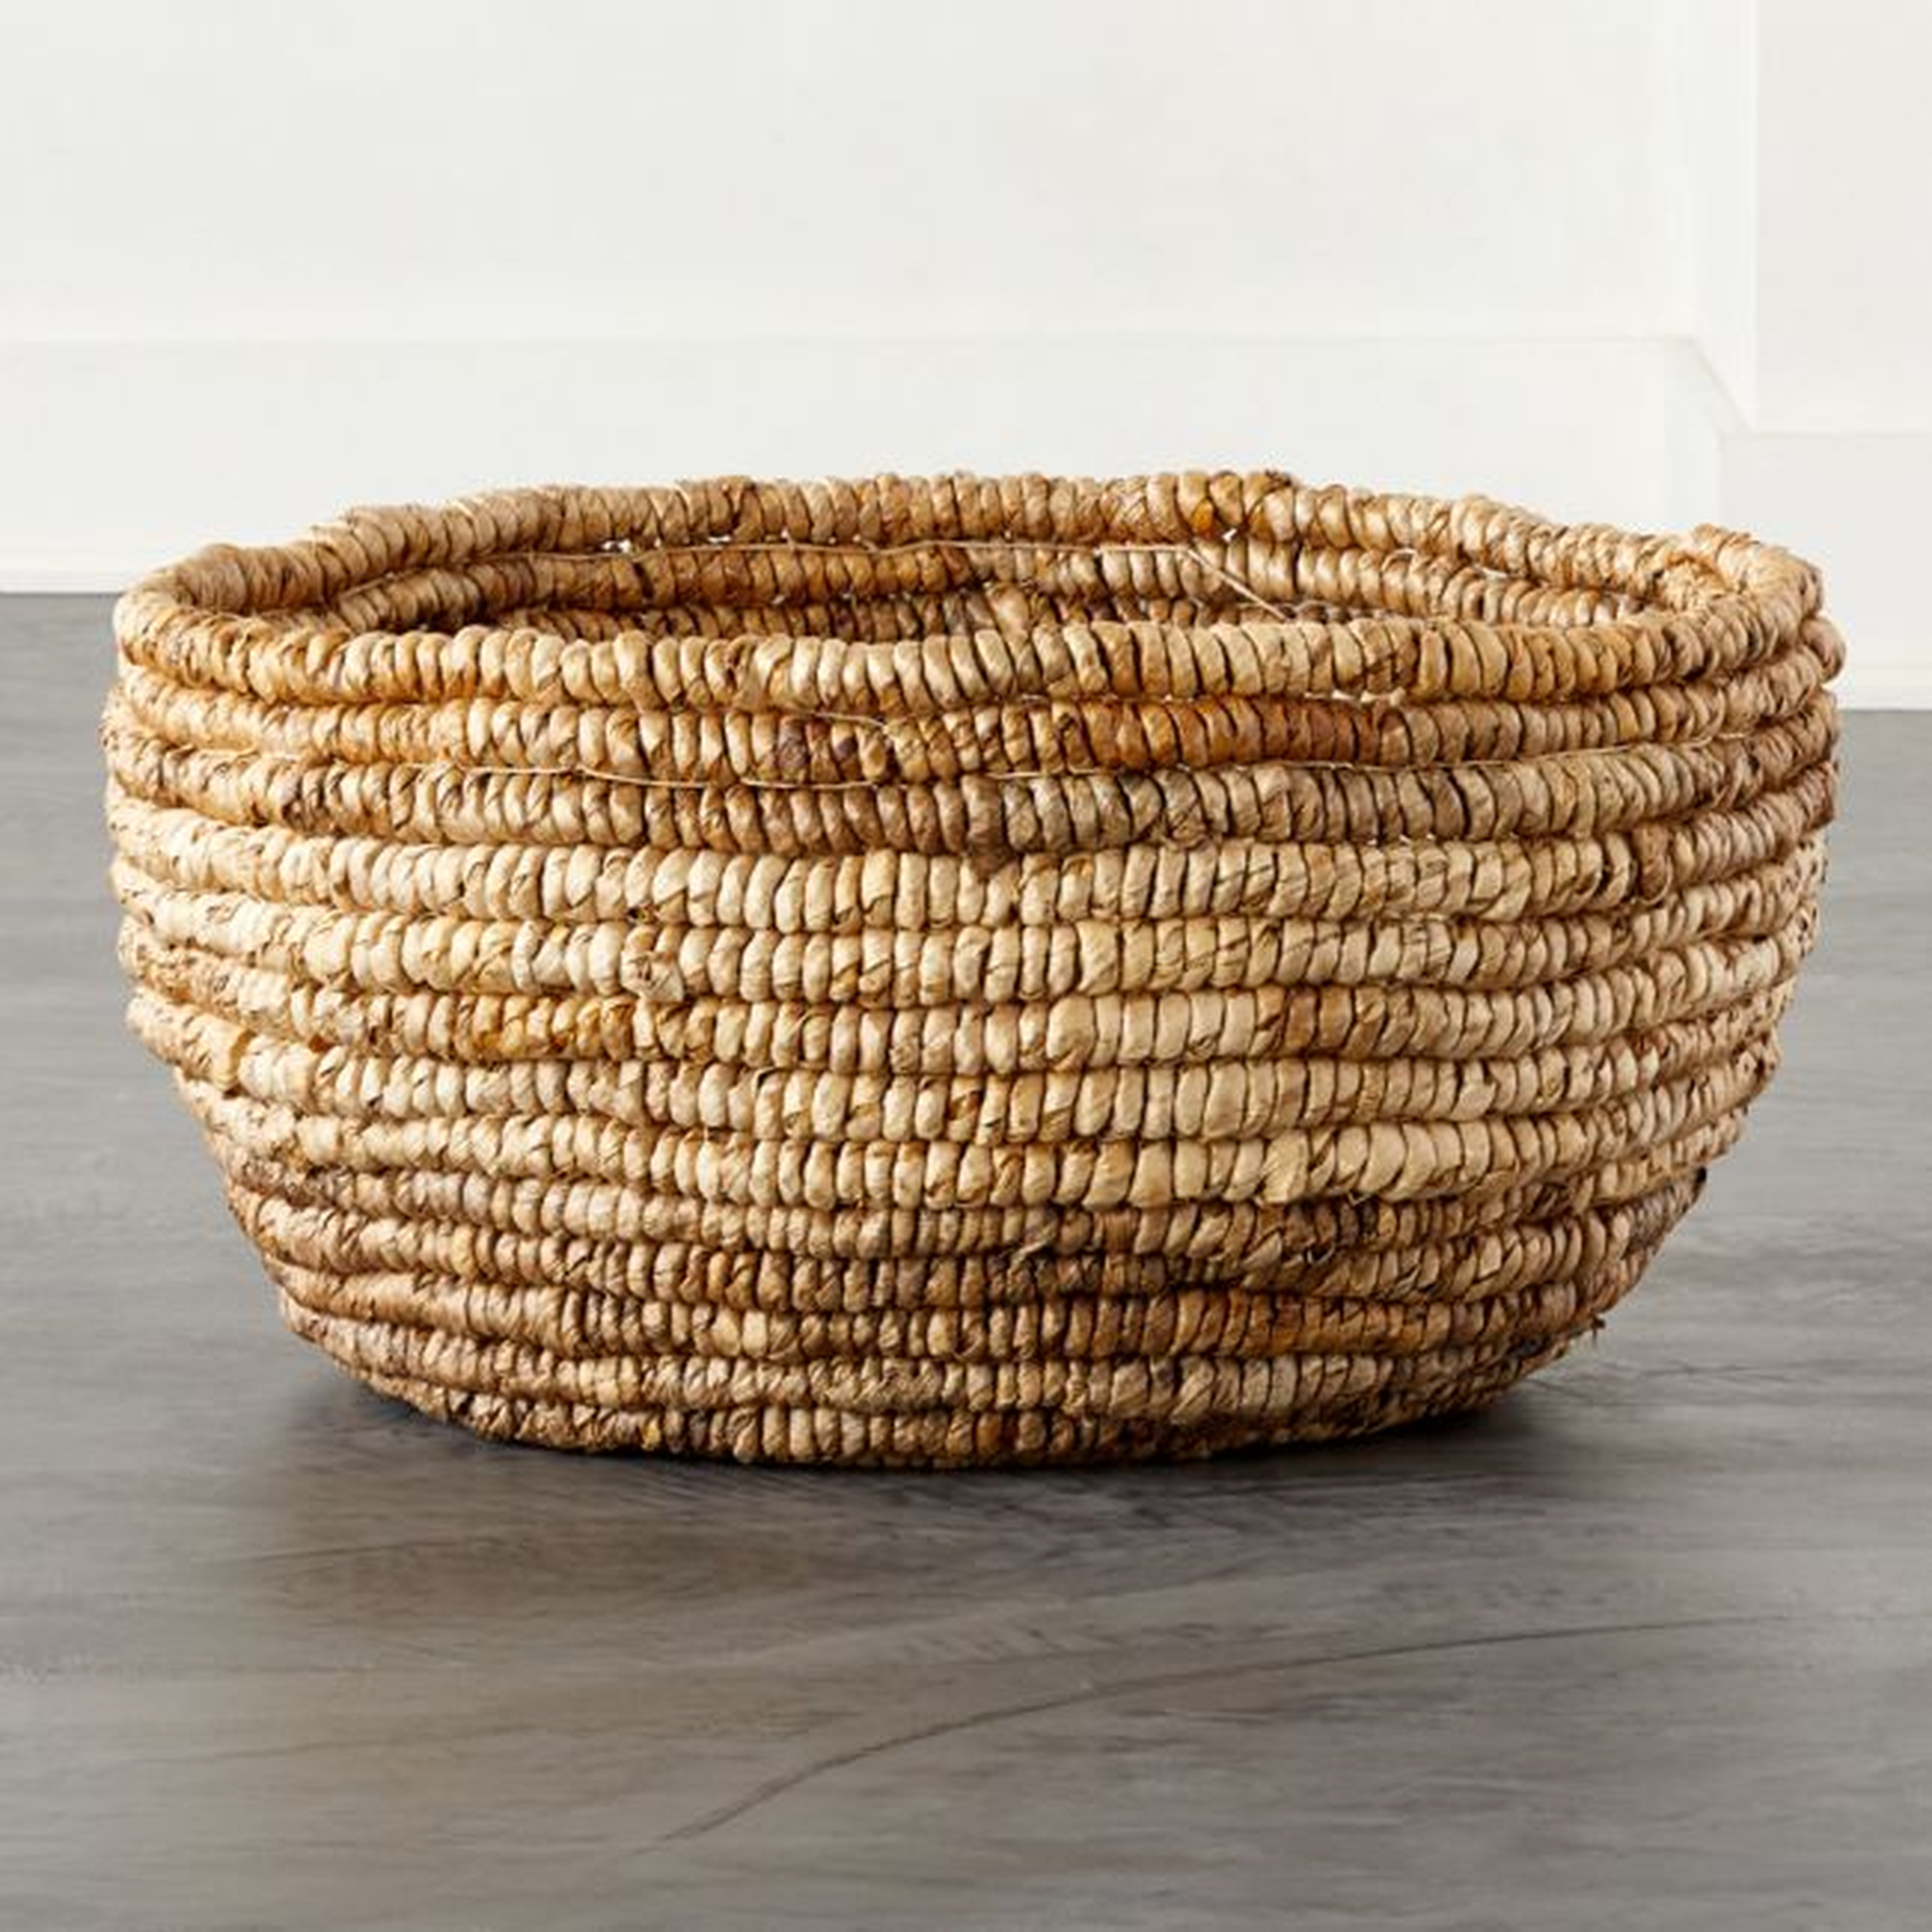 Coiled Small Basket/Bowl - CB2